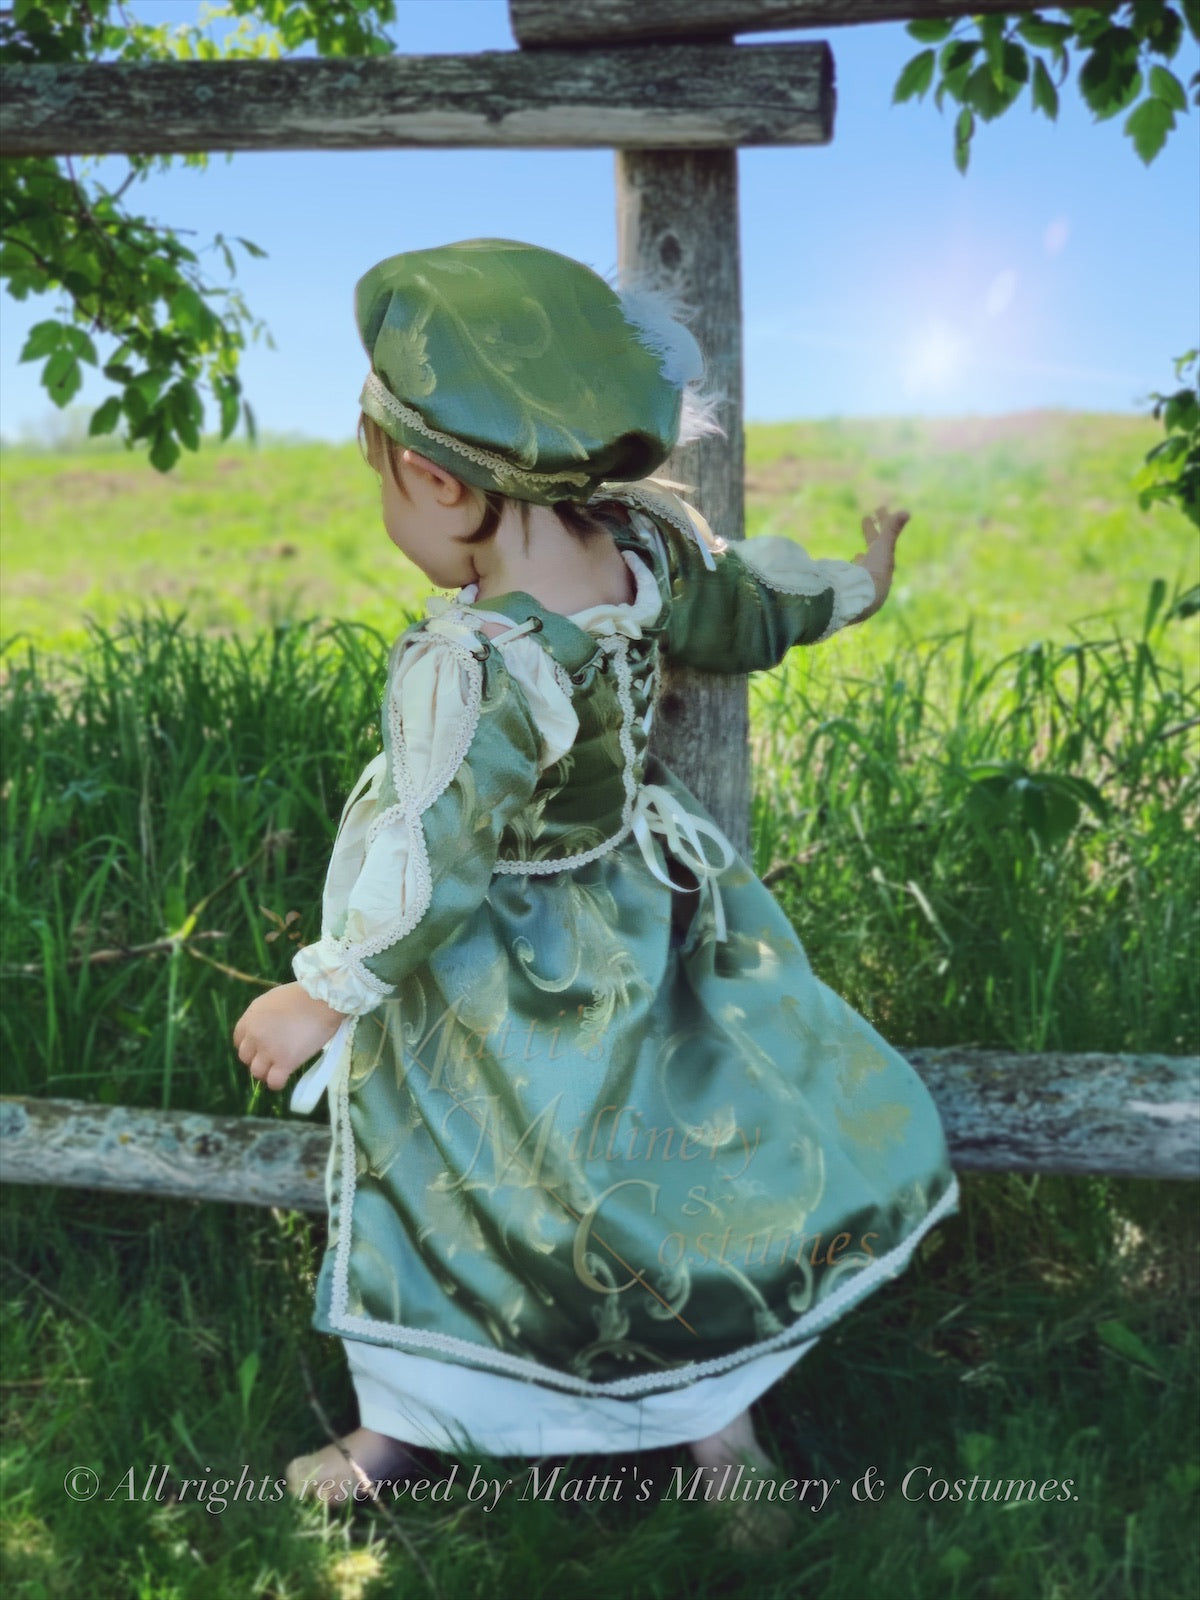 Childrens Renaissance Lil’ Ren Medieval Renaissance Court Outfit with chemise, overdress and muffin cap CUSTOM size and color